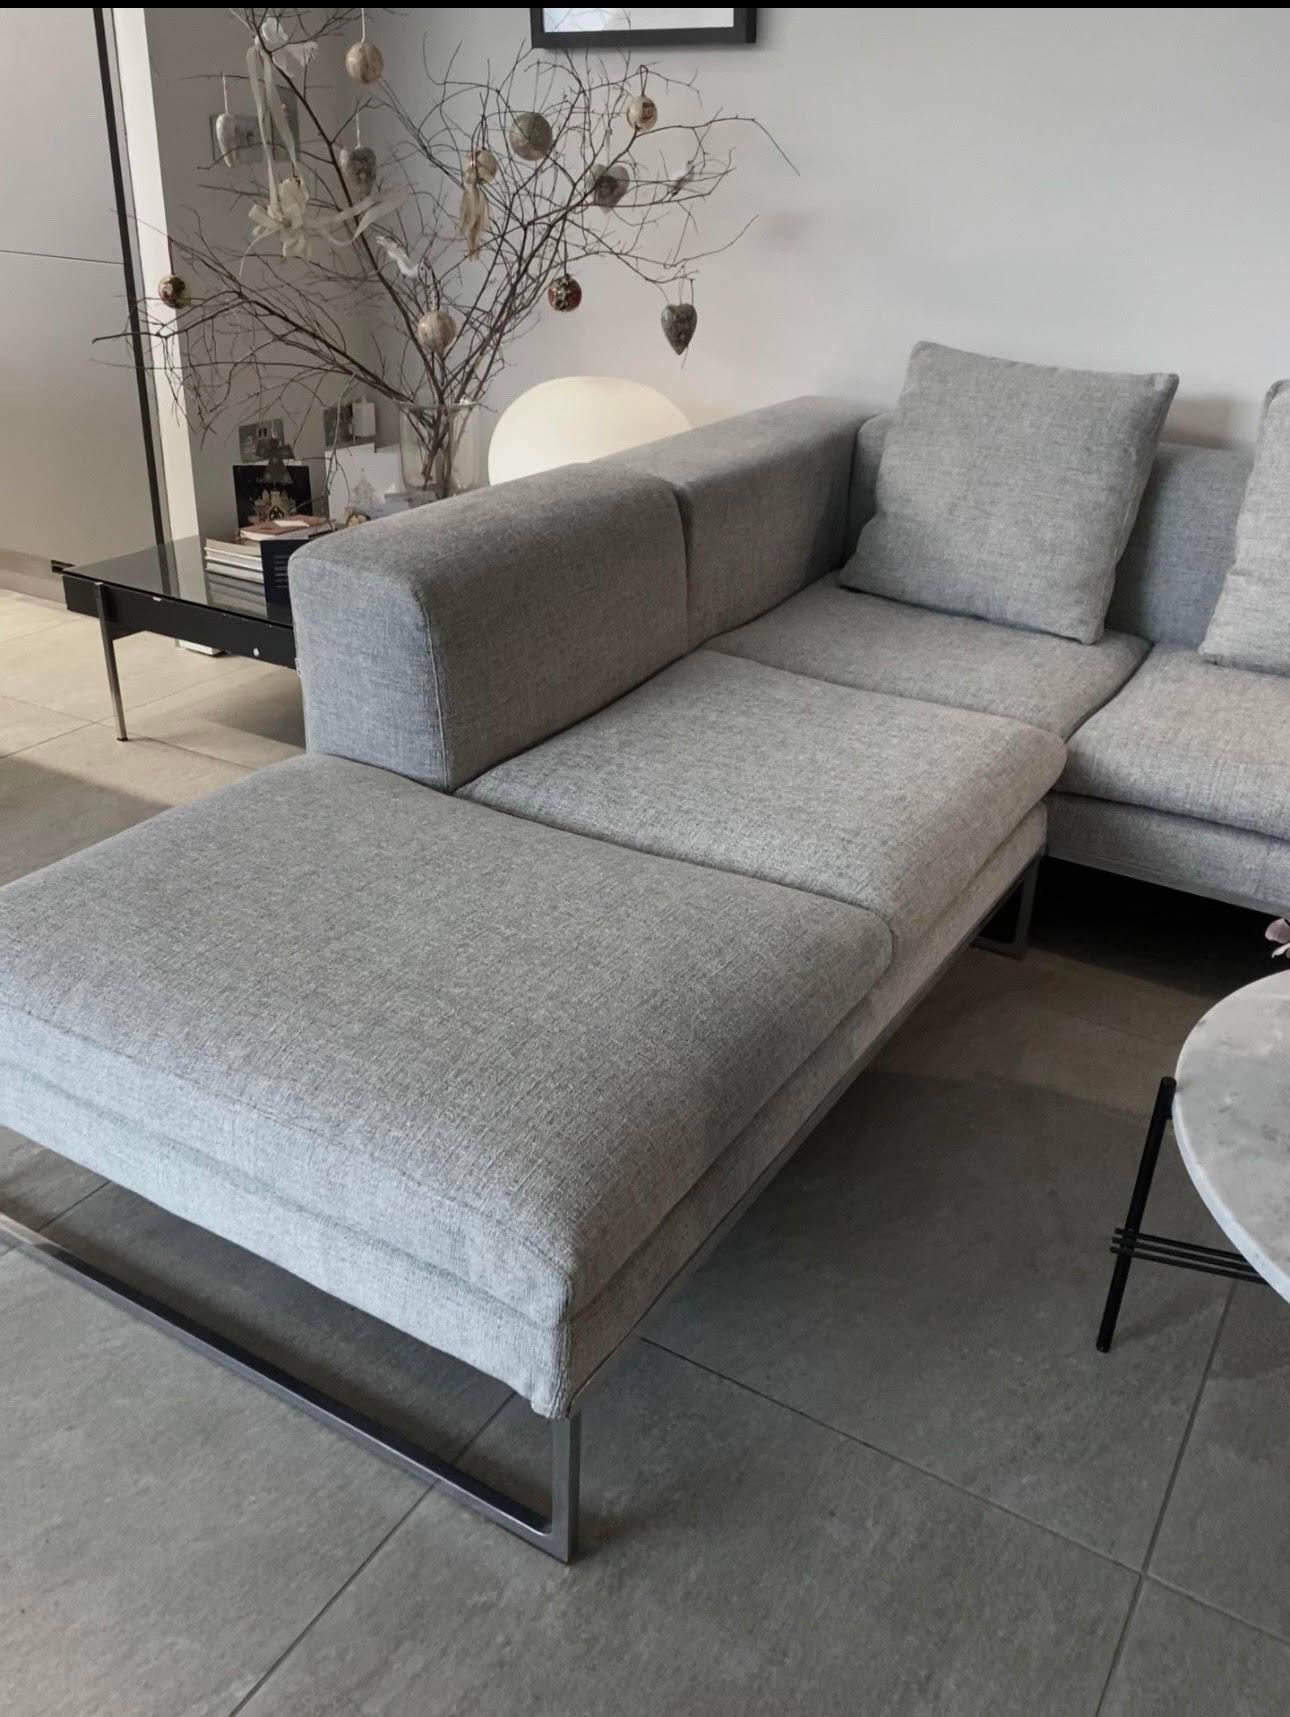 Re-upholstery service Meath
Re-upholstery service Louth
Ashbourne upholstery
Furniture maker in Dule PD Upholstery & Bespoke Furniture Meath 085 748 1556